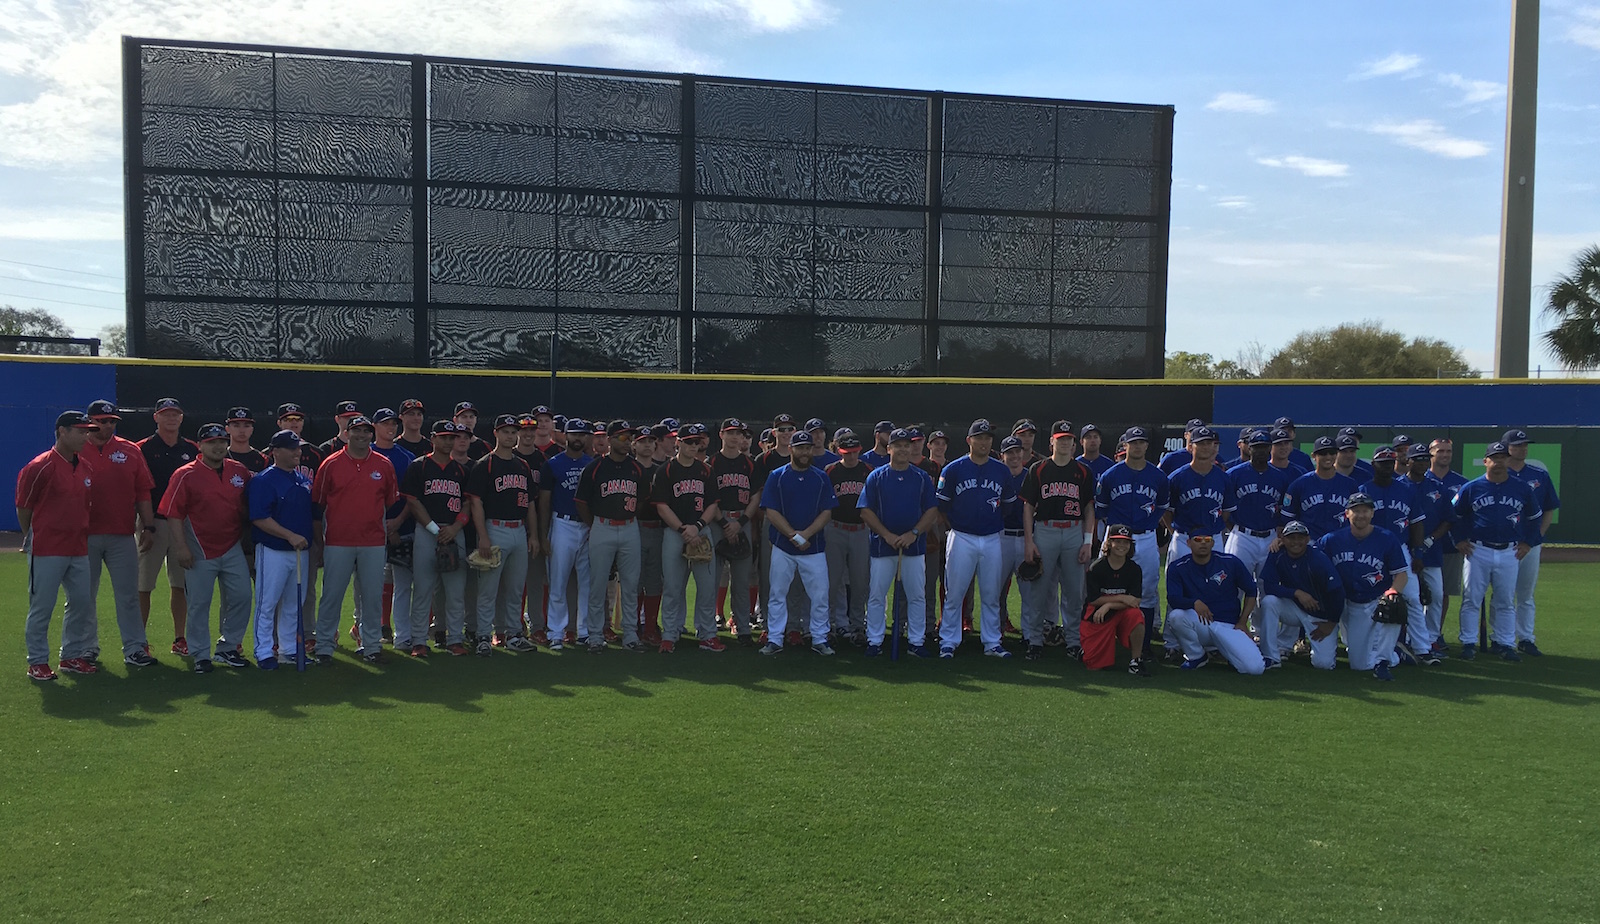 Canadians rule the day as Jays and juniors get together for annual match-up